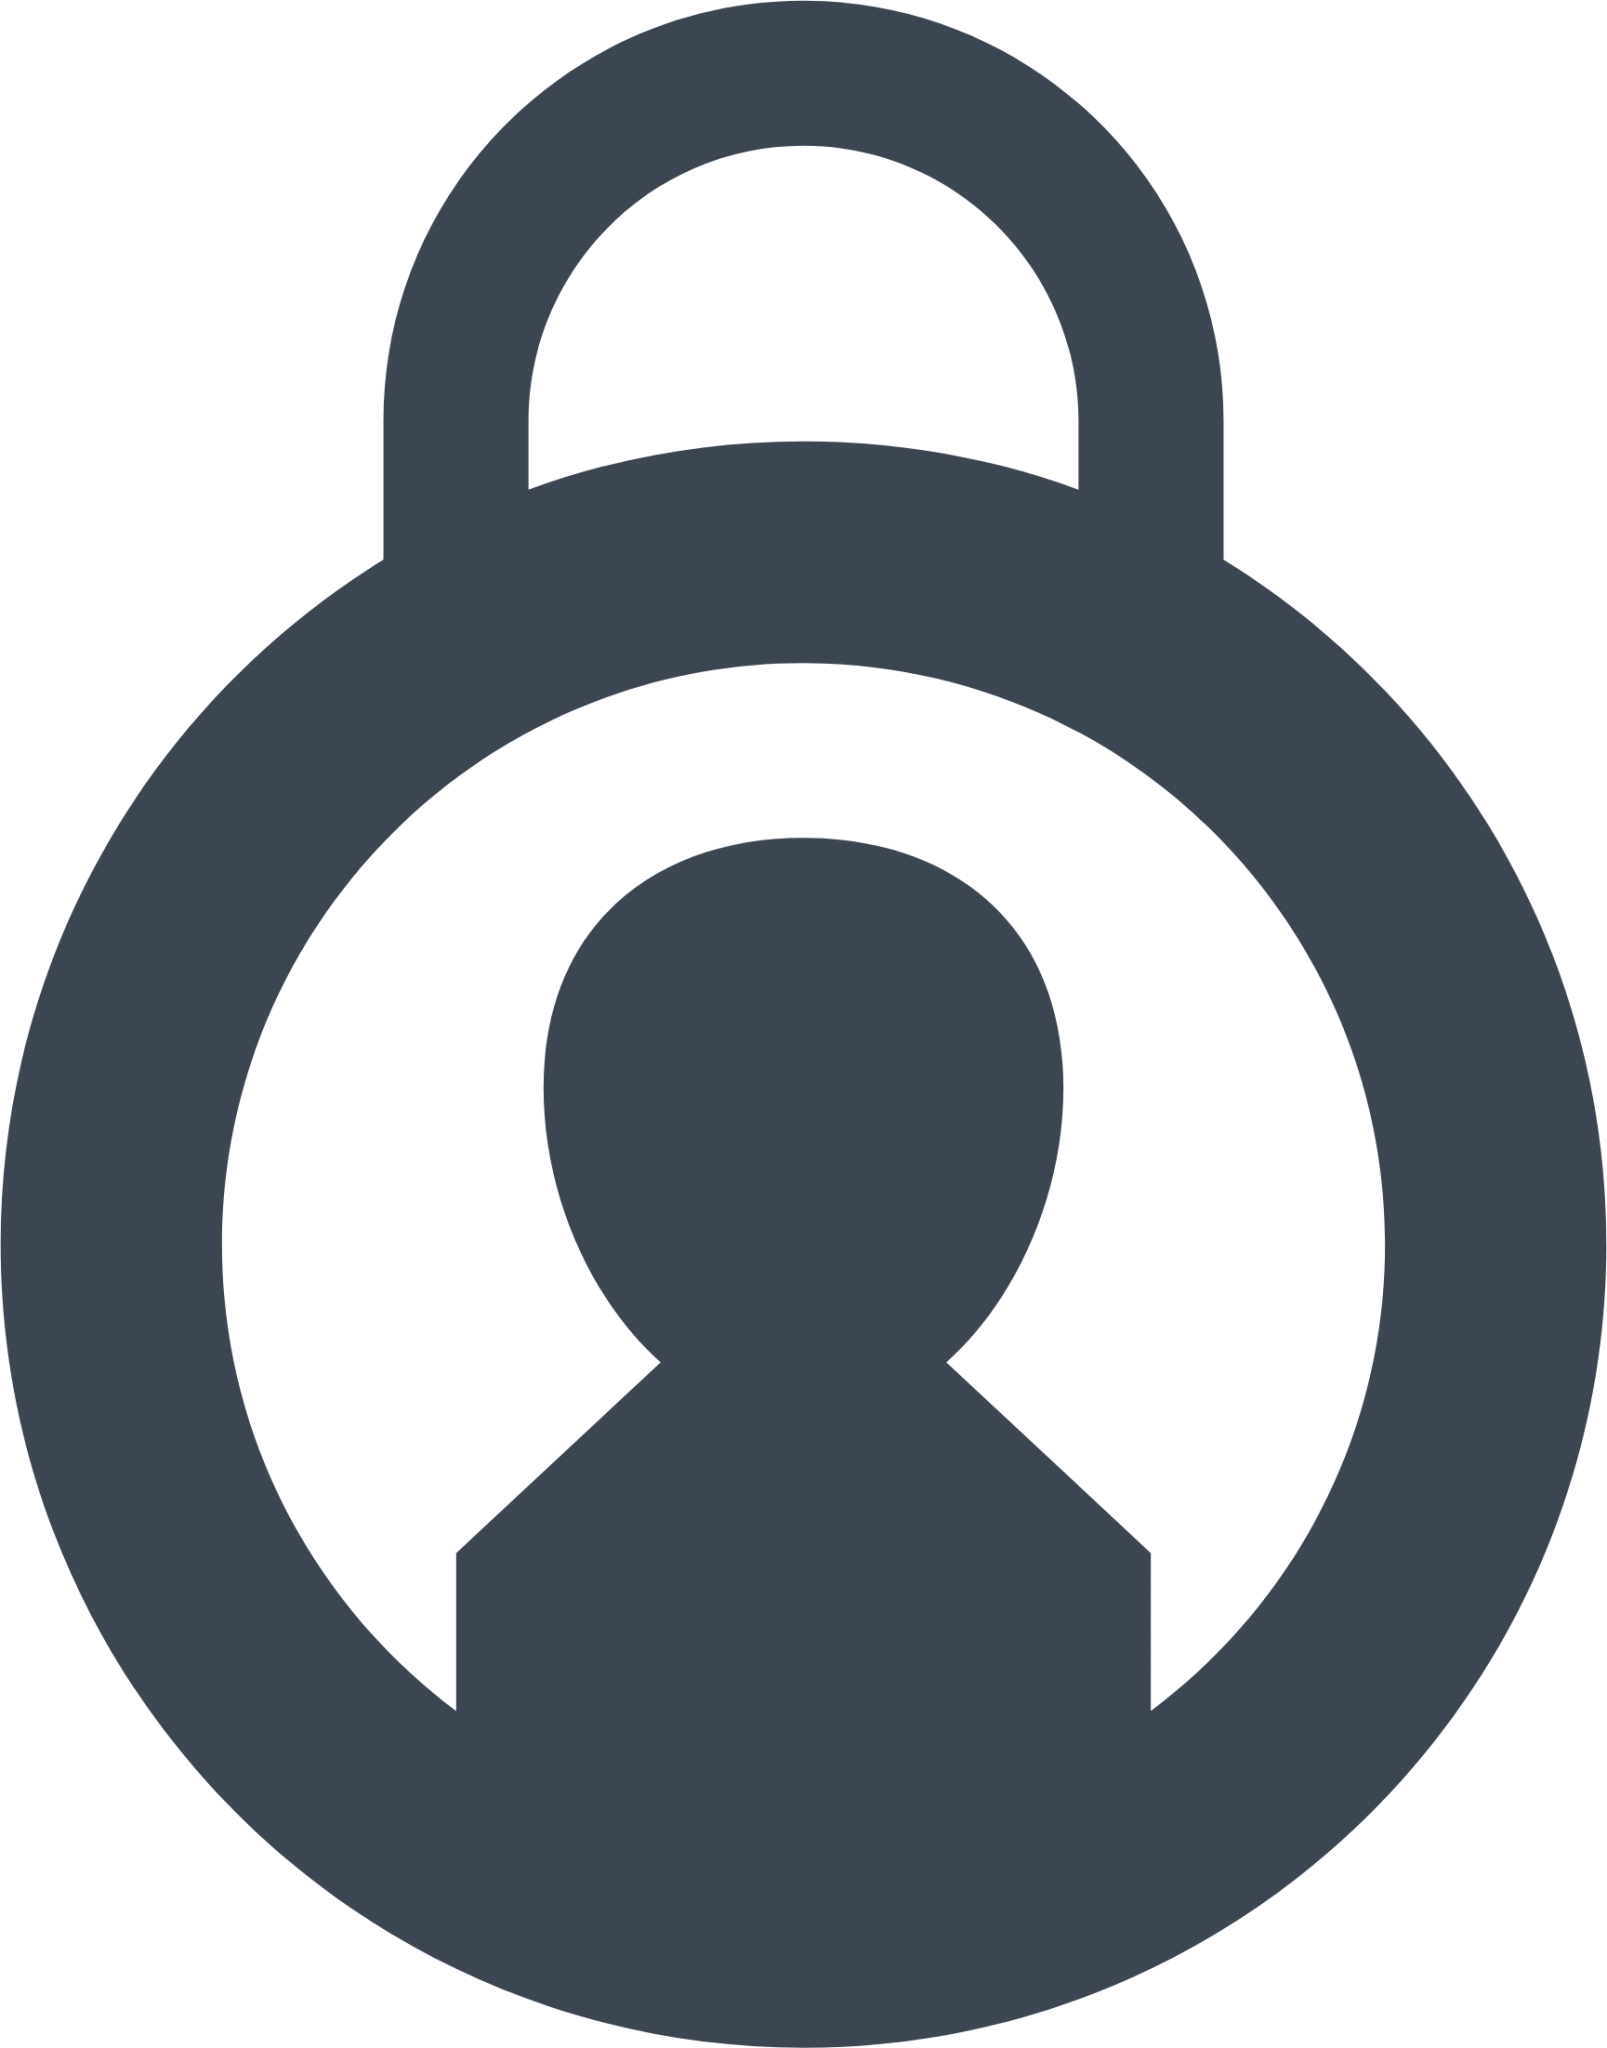 lock protect security 27 lock person icon